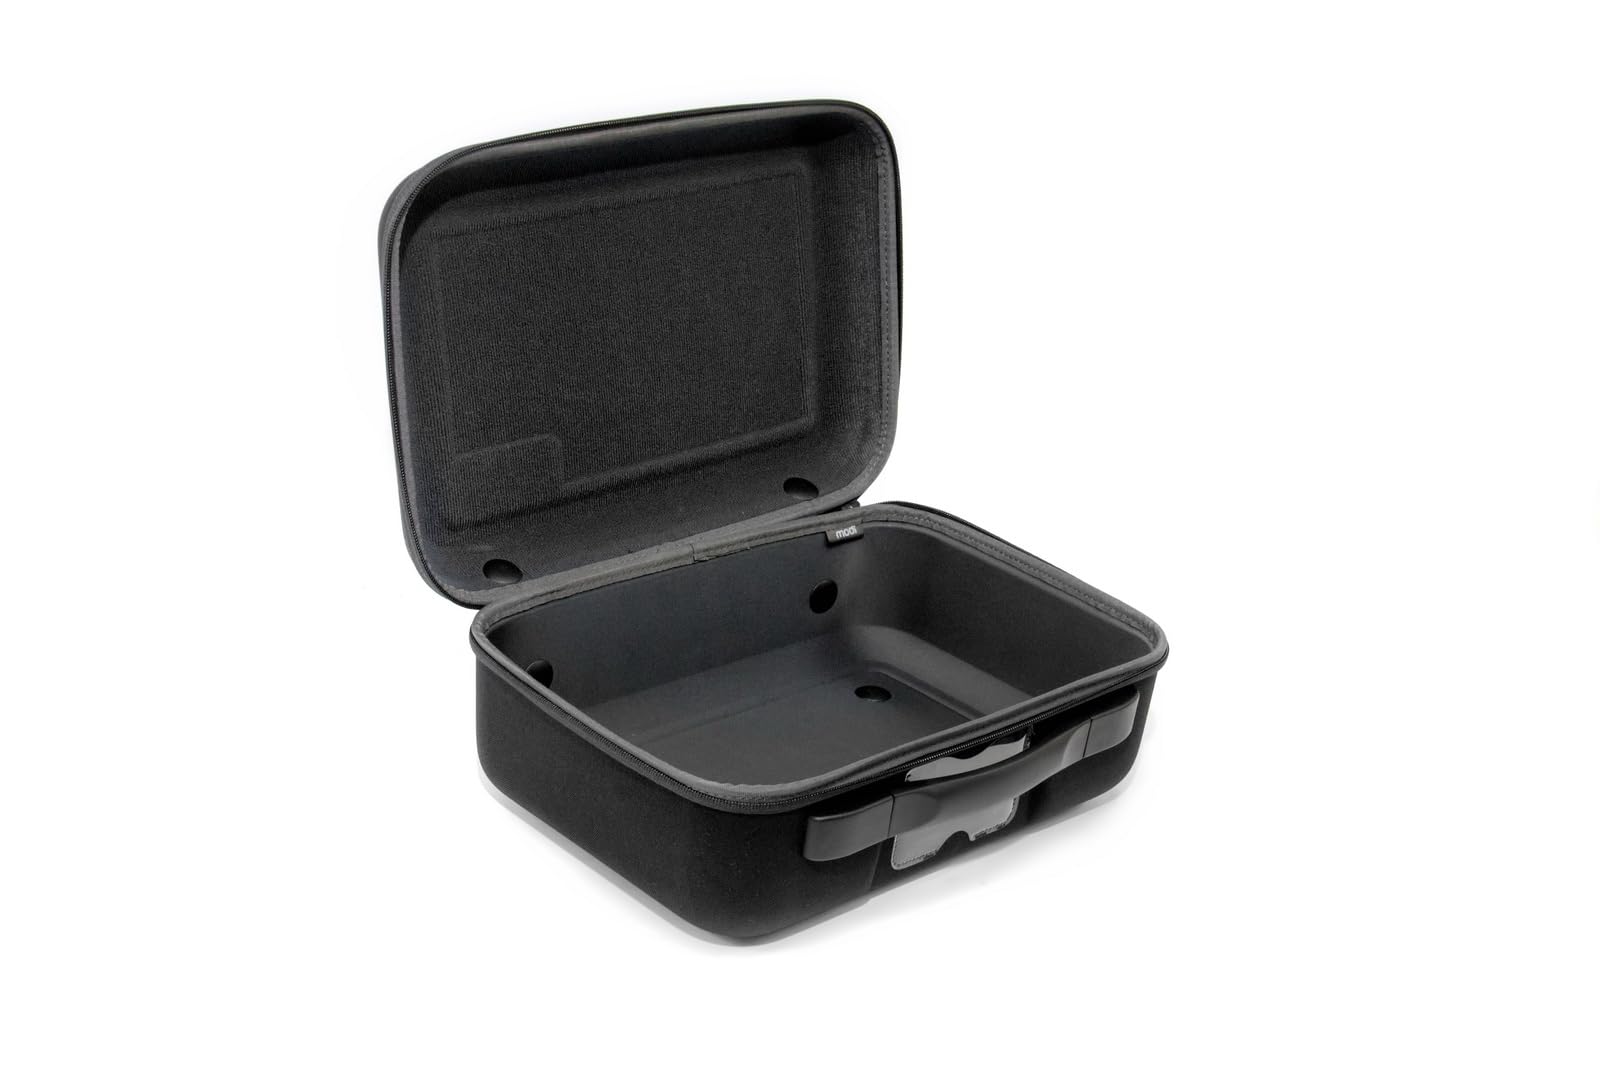 Modi 1395 EVA Hard Shell Soft Case - Spacious Storage for GPS, Power Banks, and Electronic Gadgets, Travel Ready